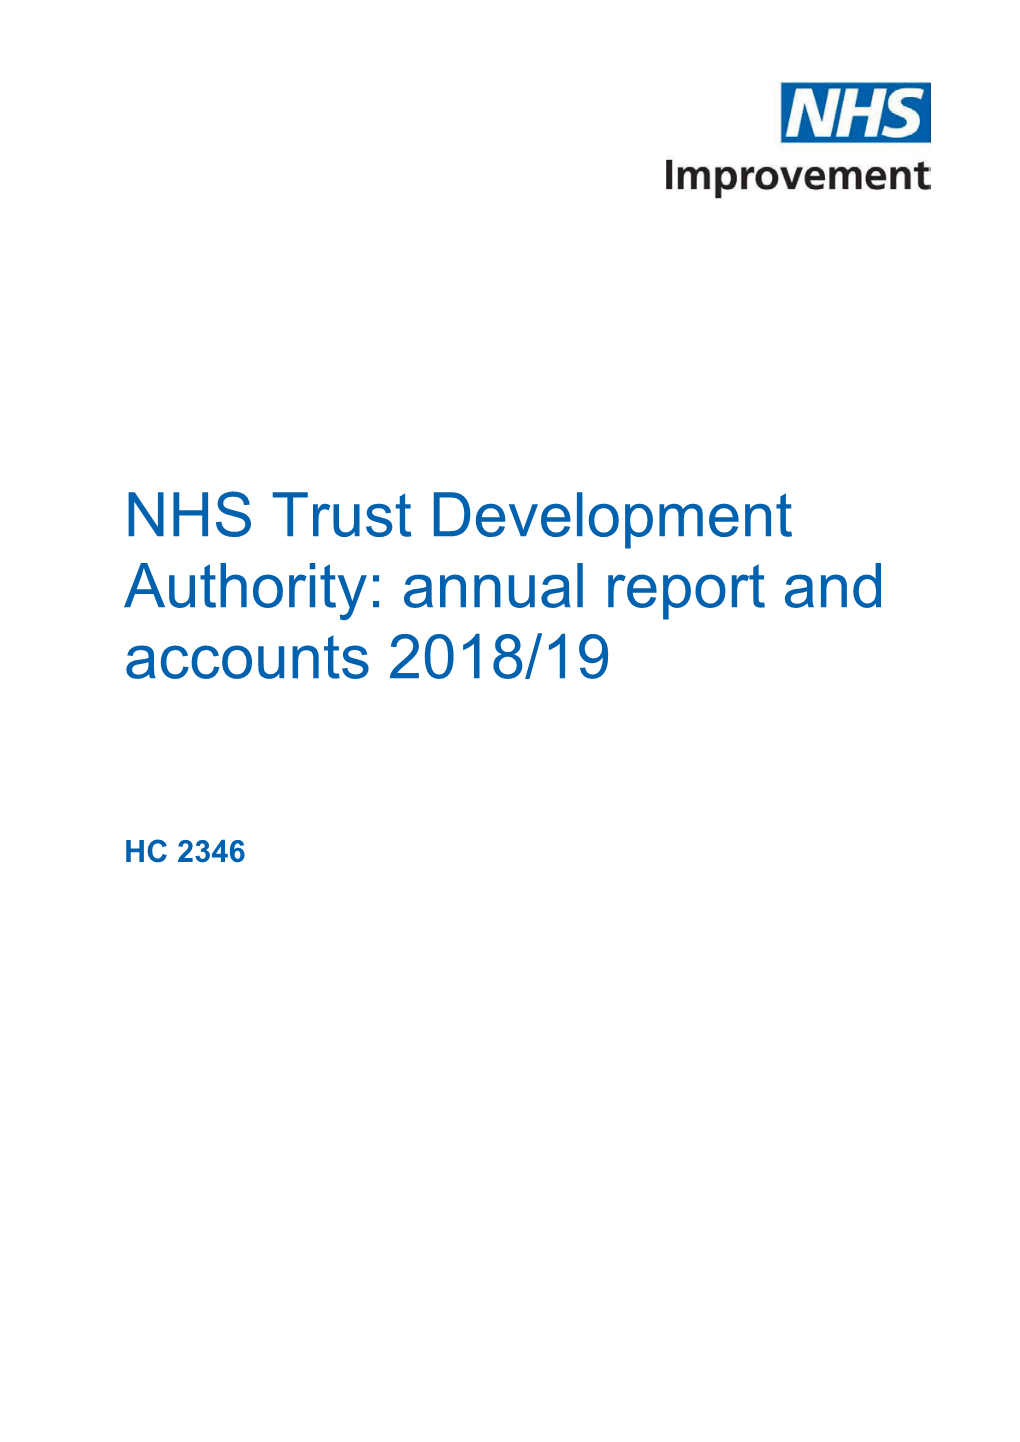 NHS Trust Development Authority: Annual Report and Accounts 2018/19